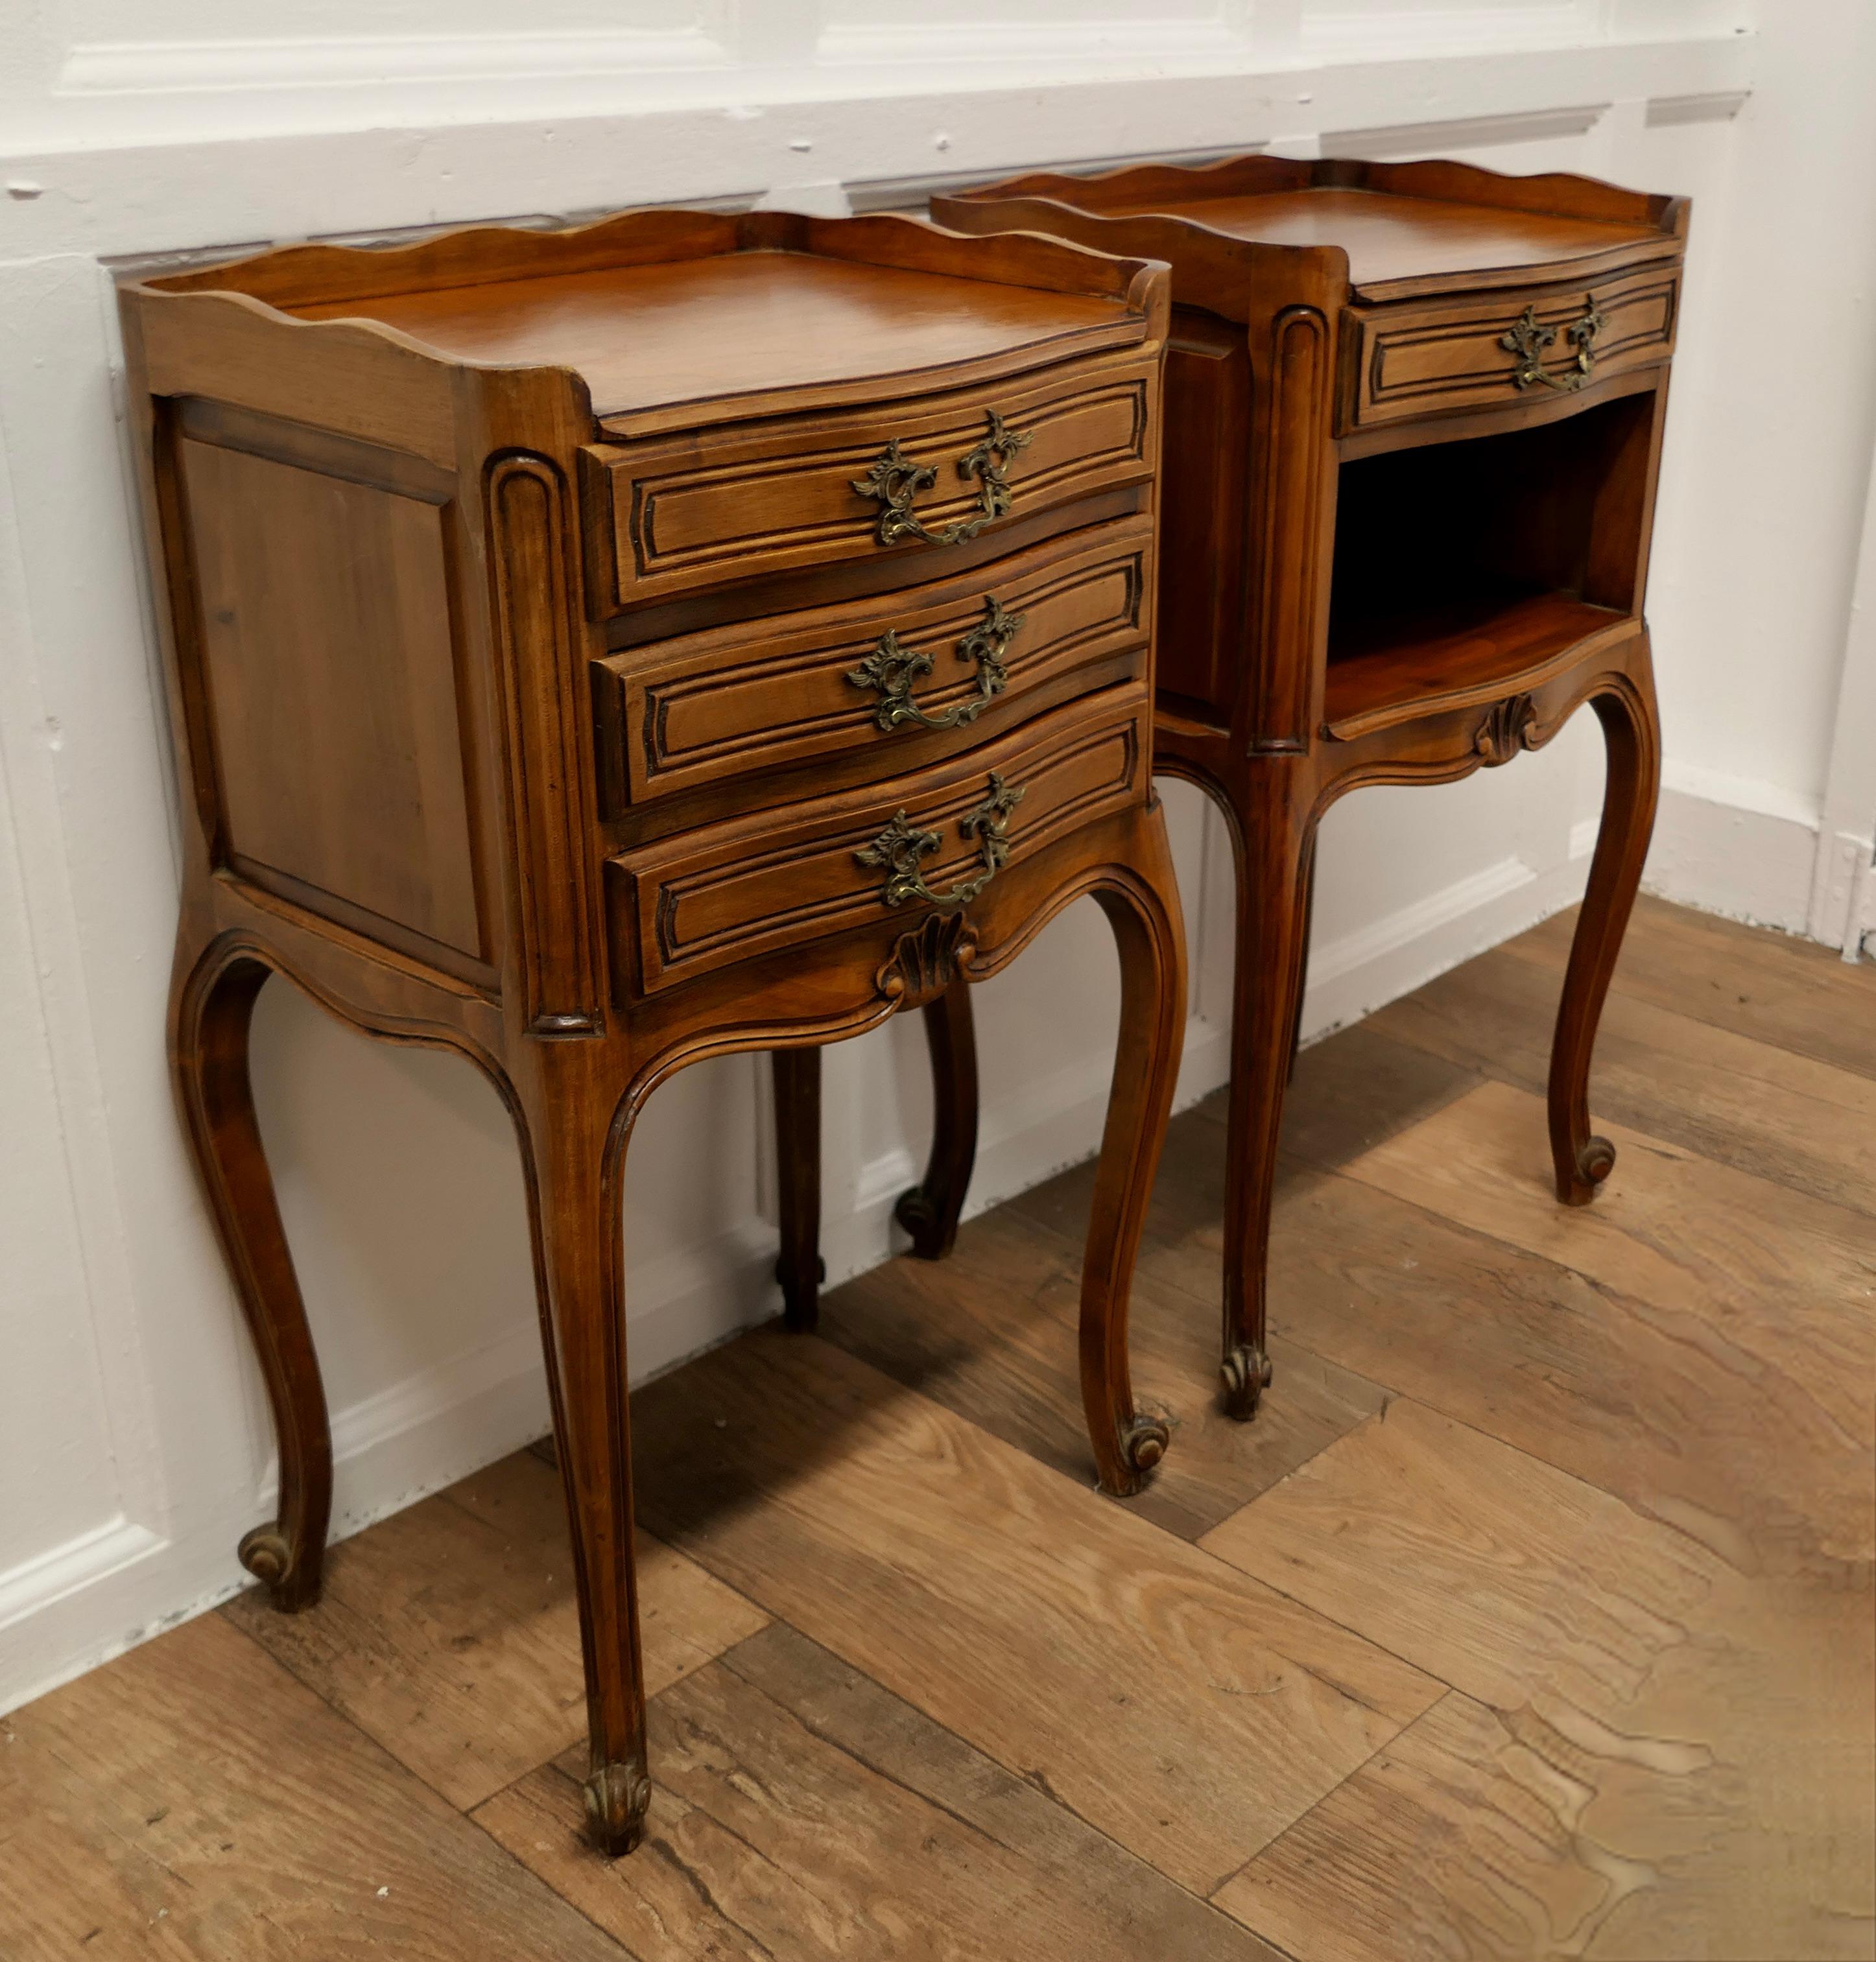 Pair of French Cherry Wood Bedside Cabinets or Cupboards In Good Condition For Sale In Chillerton, Isle of Wight